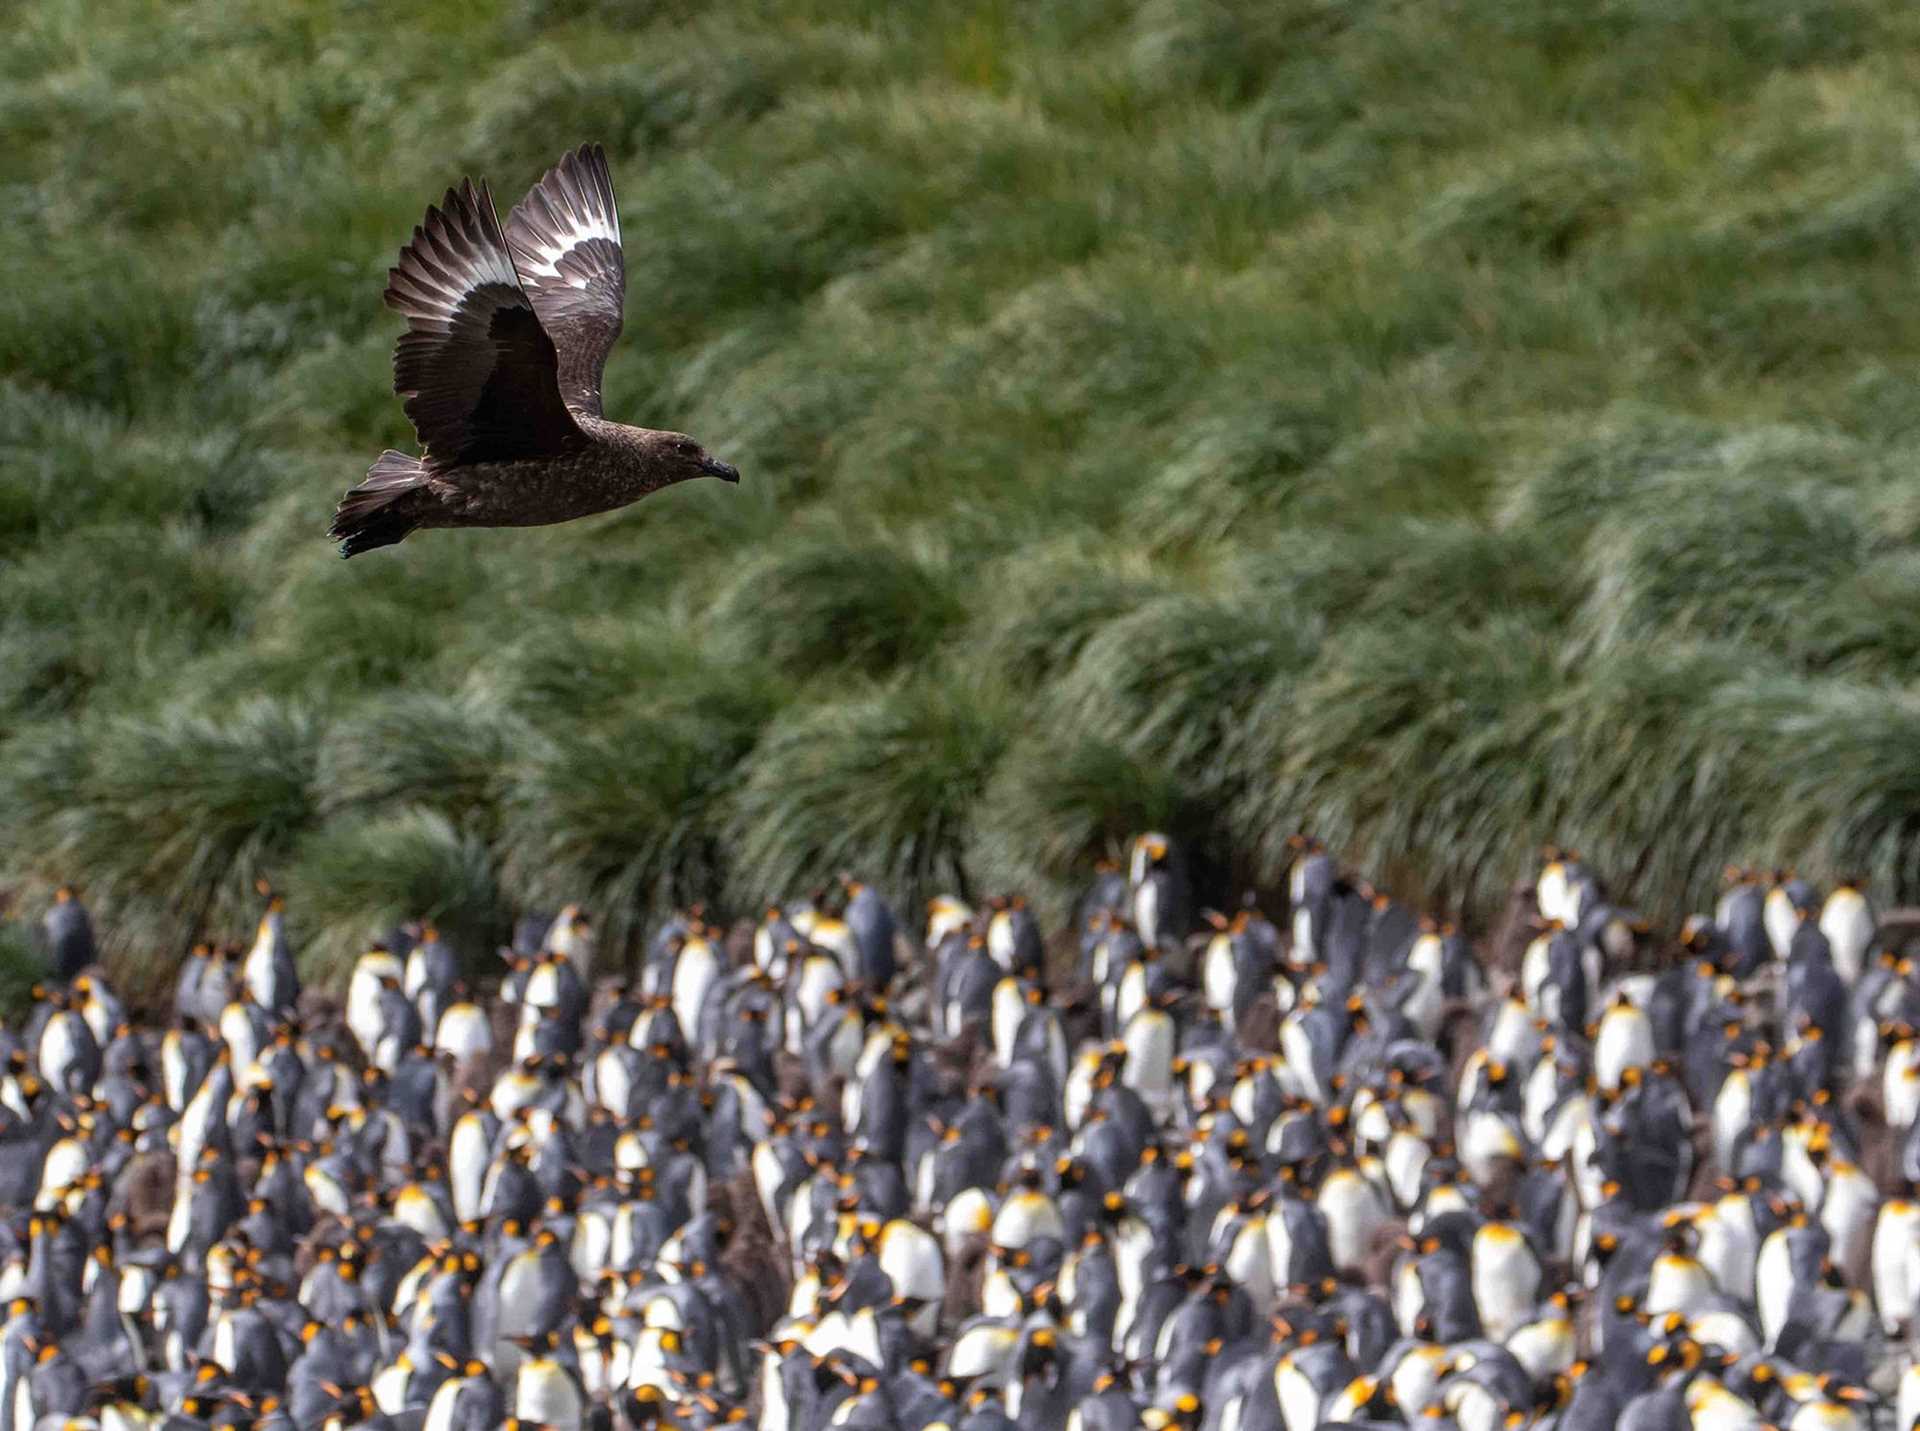 large bird flying over thousands of penguins